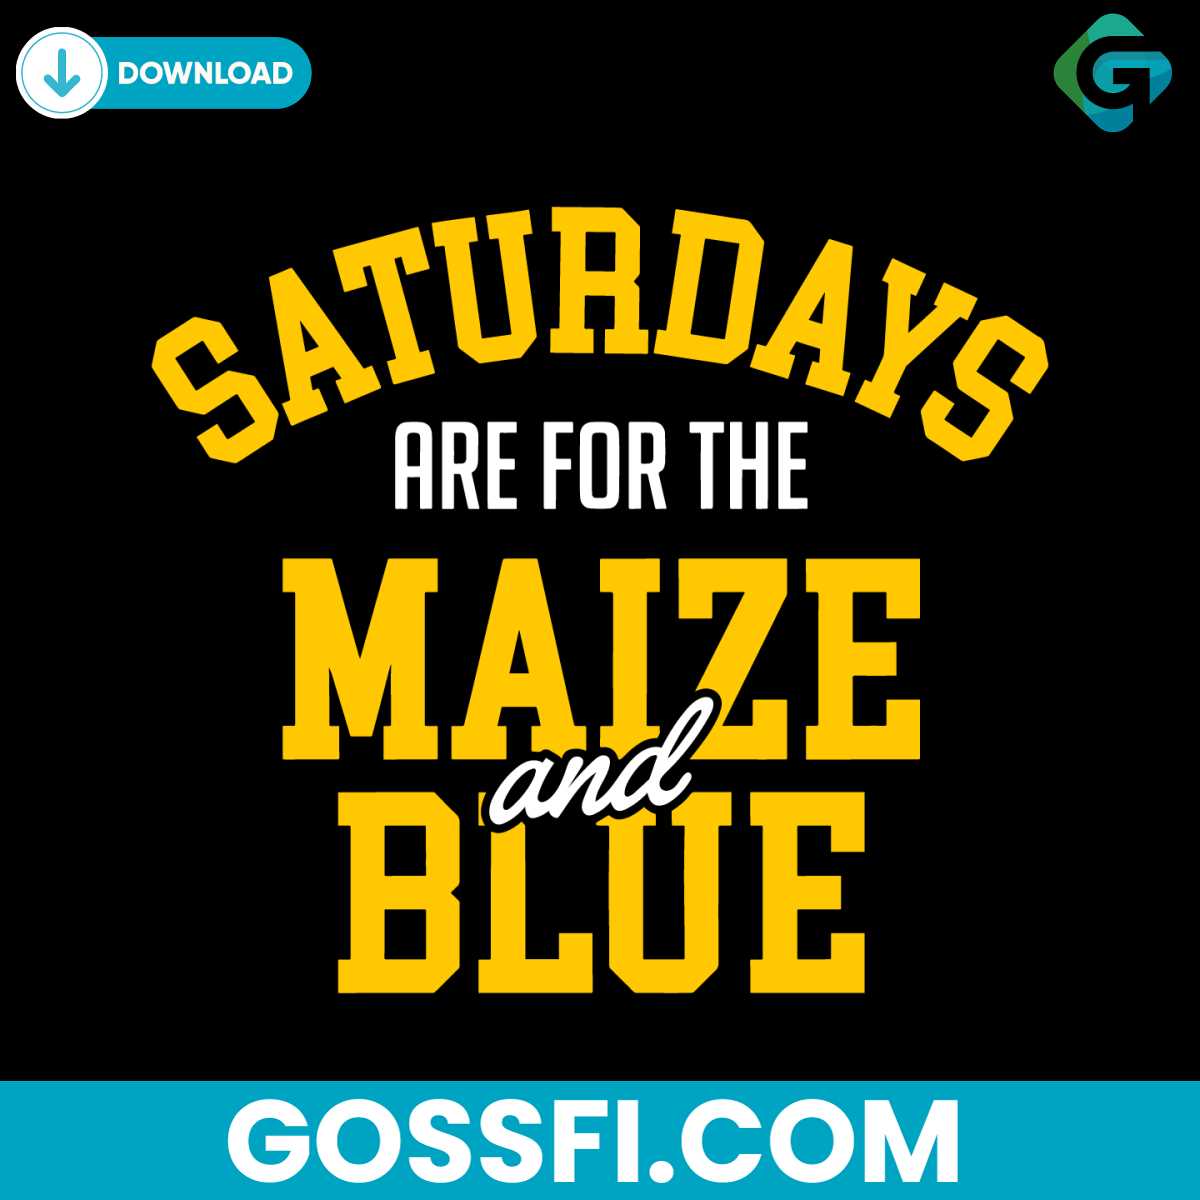 saturdays-are-for-the-maize-and-blue-michigan-college-svg